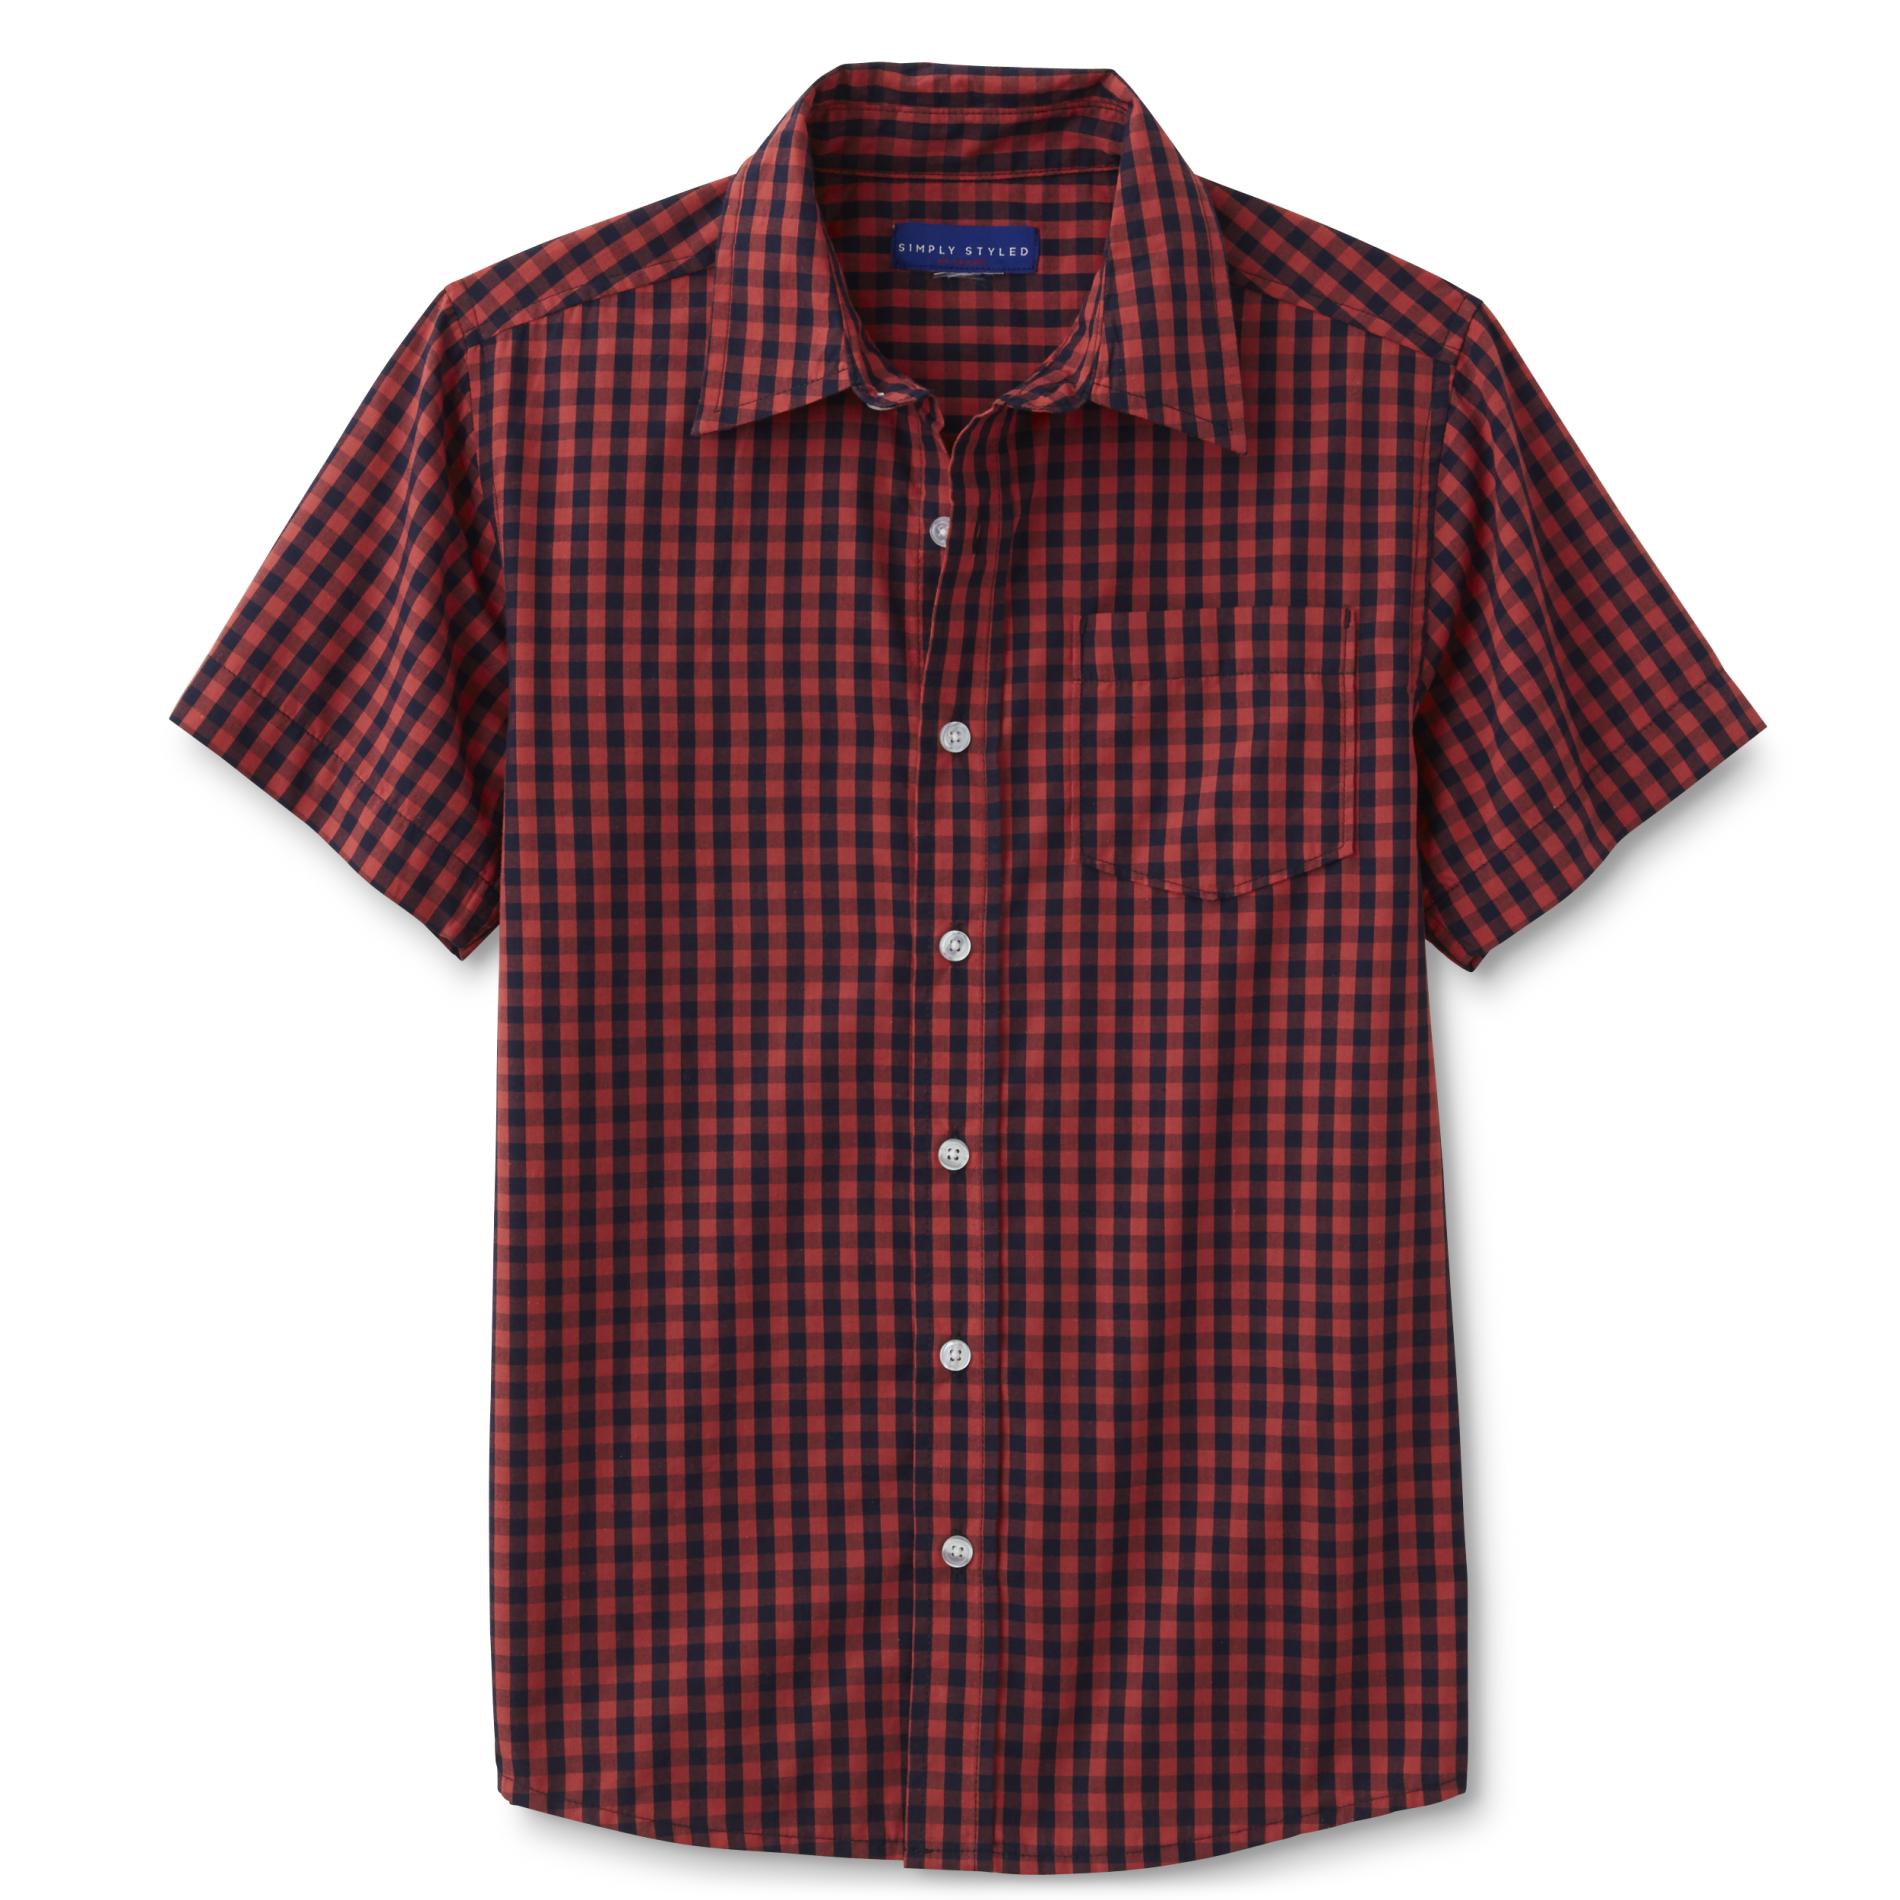 Simply Styled Boys' Short-Sleeve Button-Front Shirt - Checkered